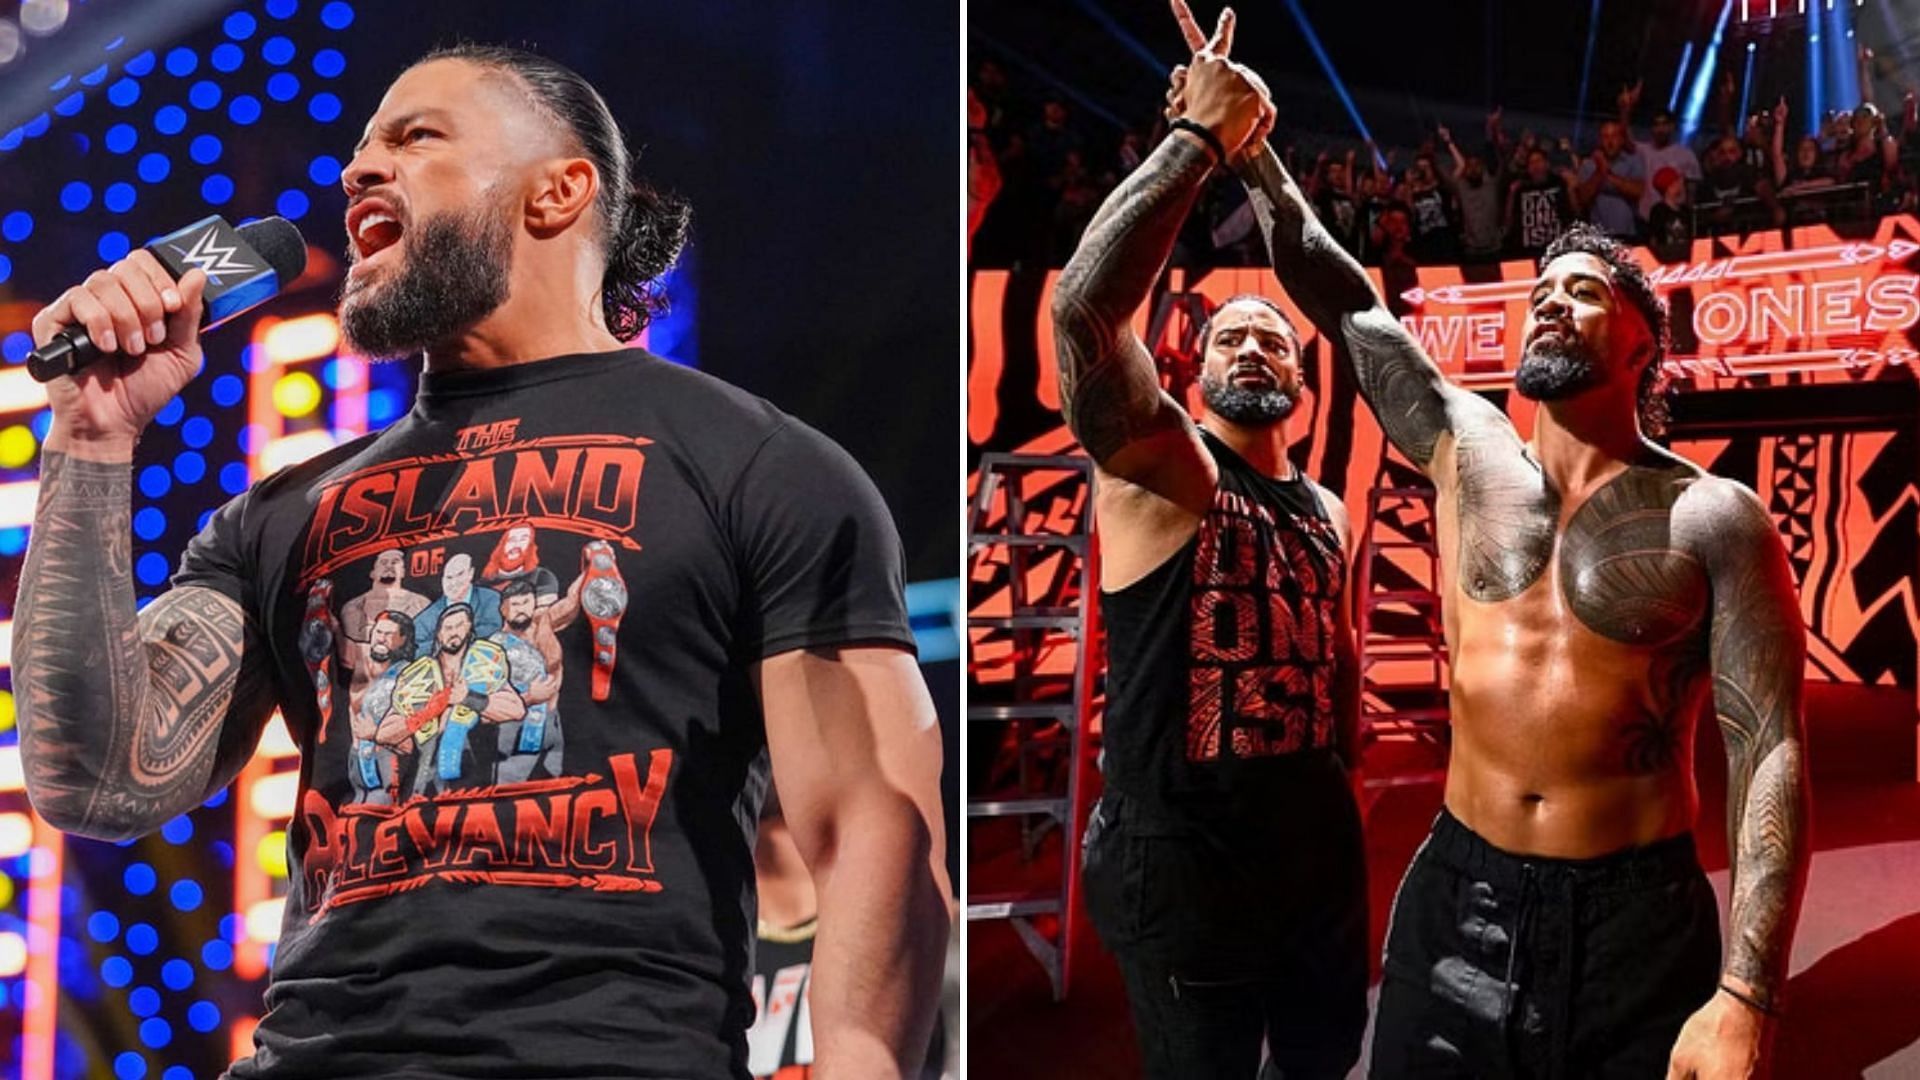 Roman Reigns (left) and The Usos (right)